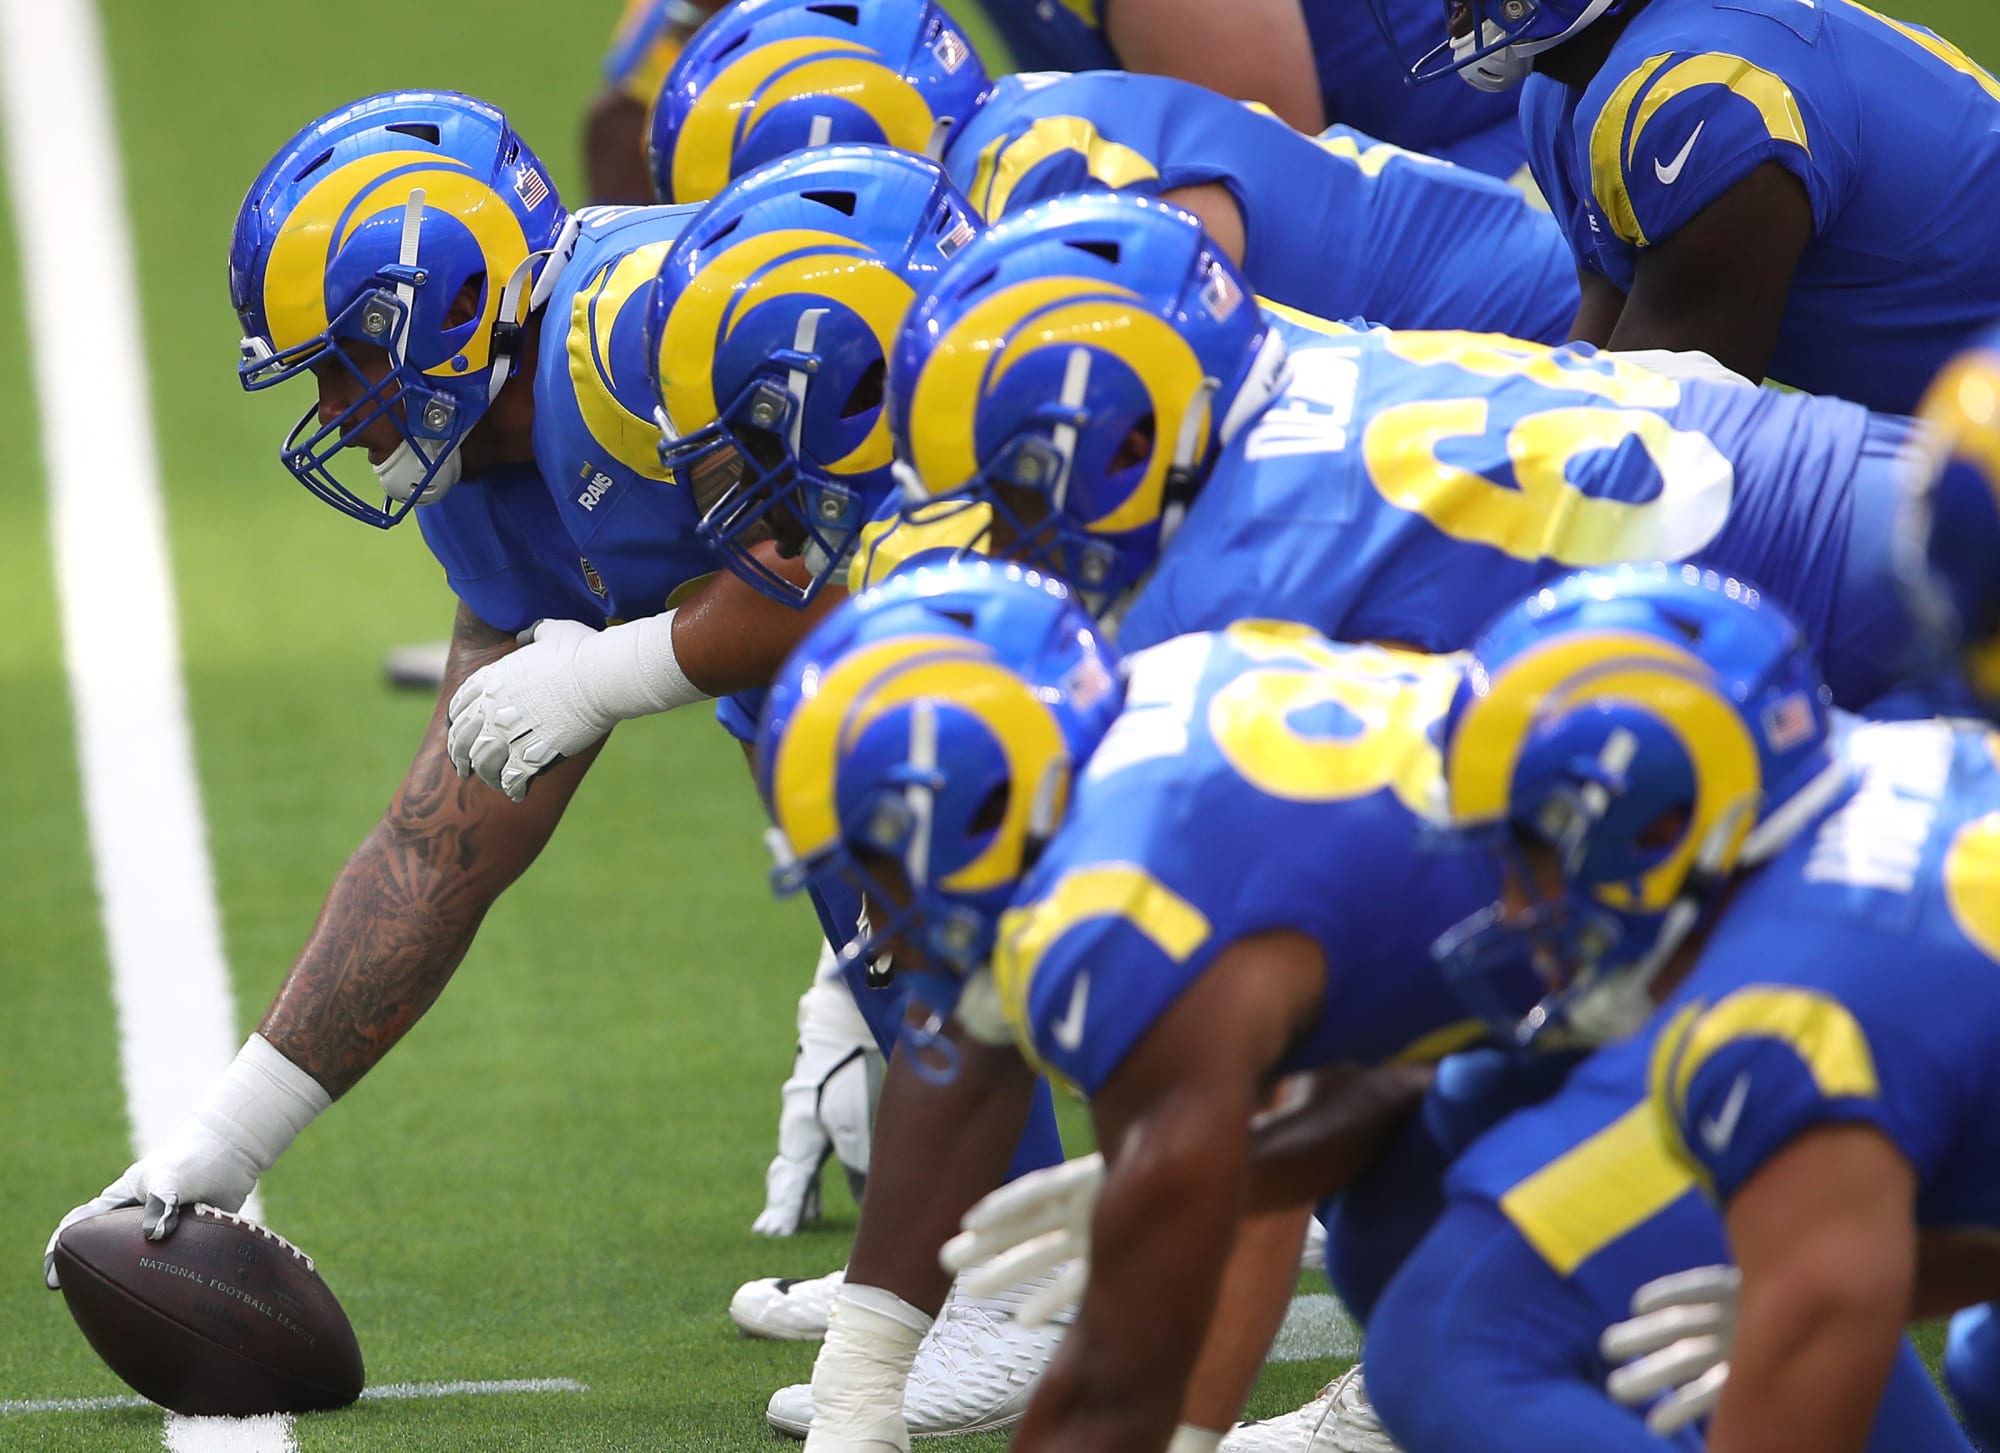 New day dawning for LA Rams offensive line this season